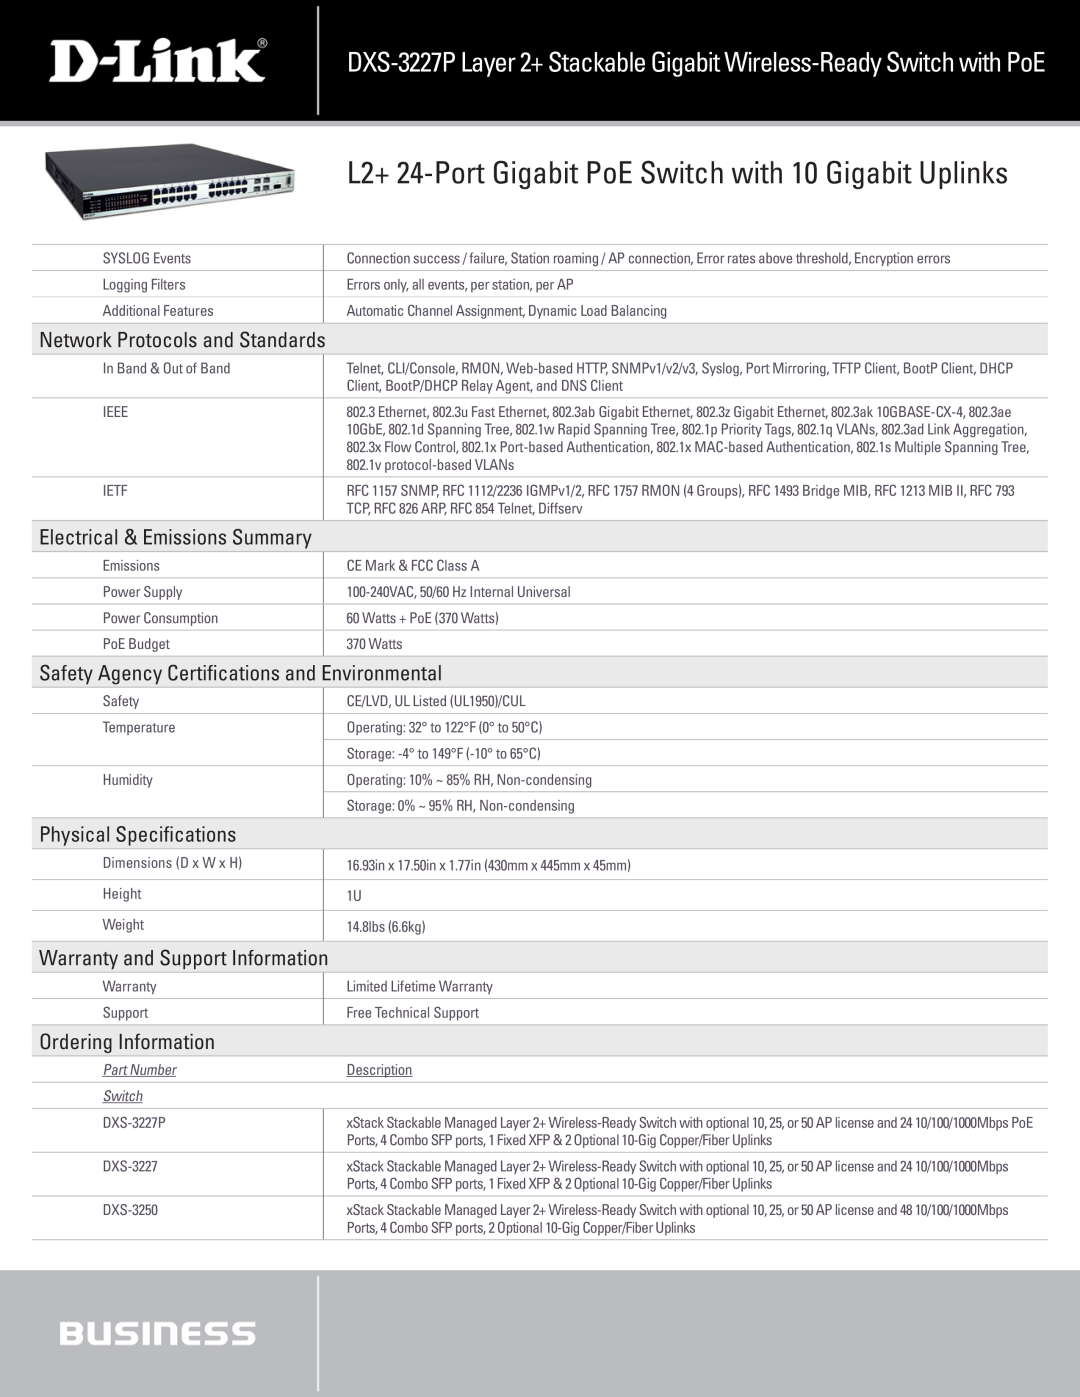 D-Link DXS-3227P Network Protocols and Standards, Electrical & Emissions Summary, Physical Specifications, Part Number 